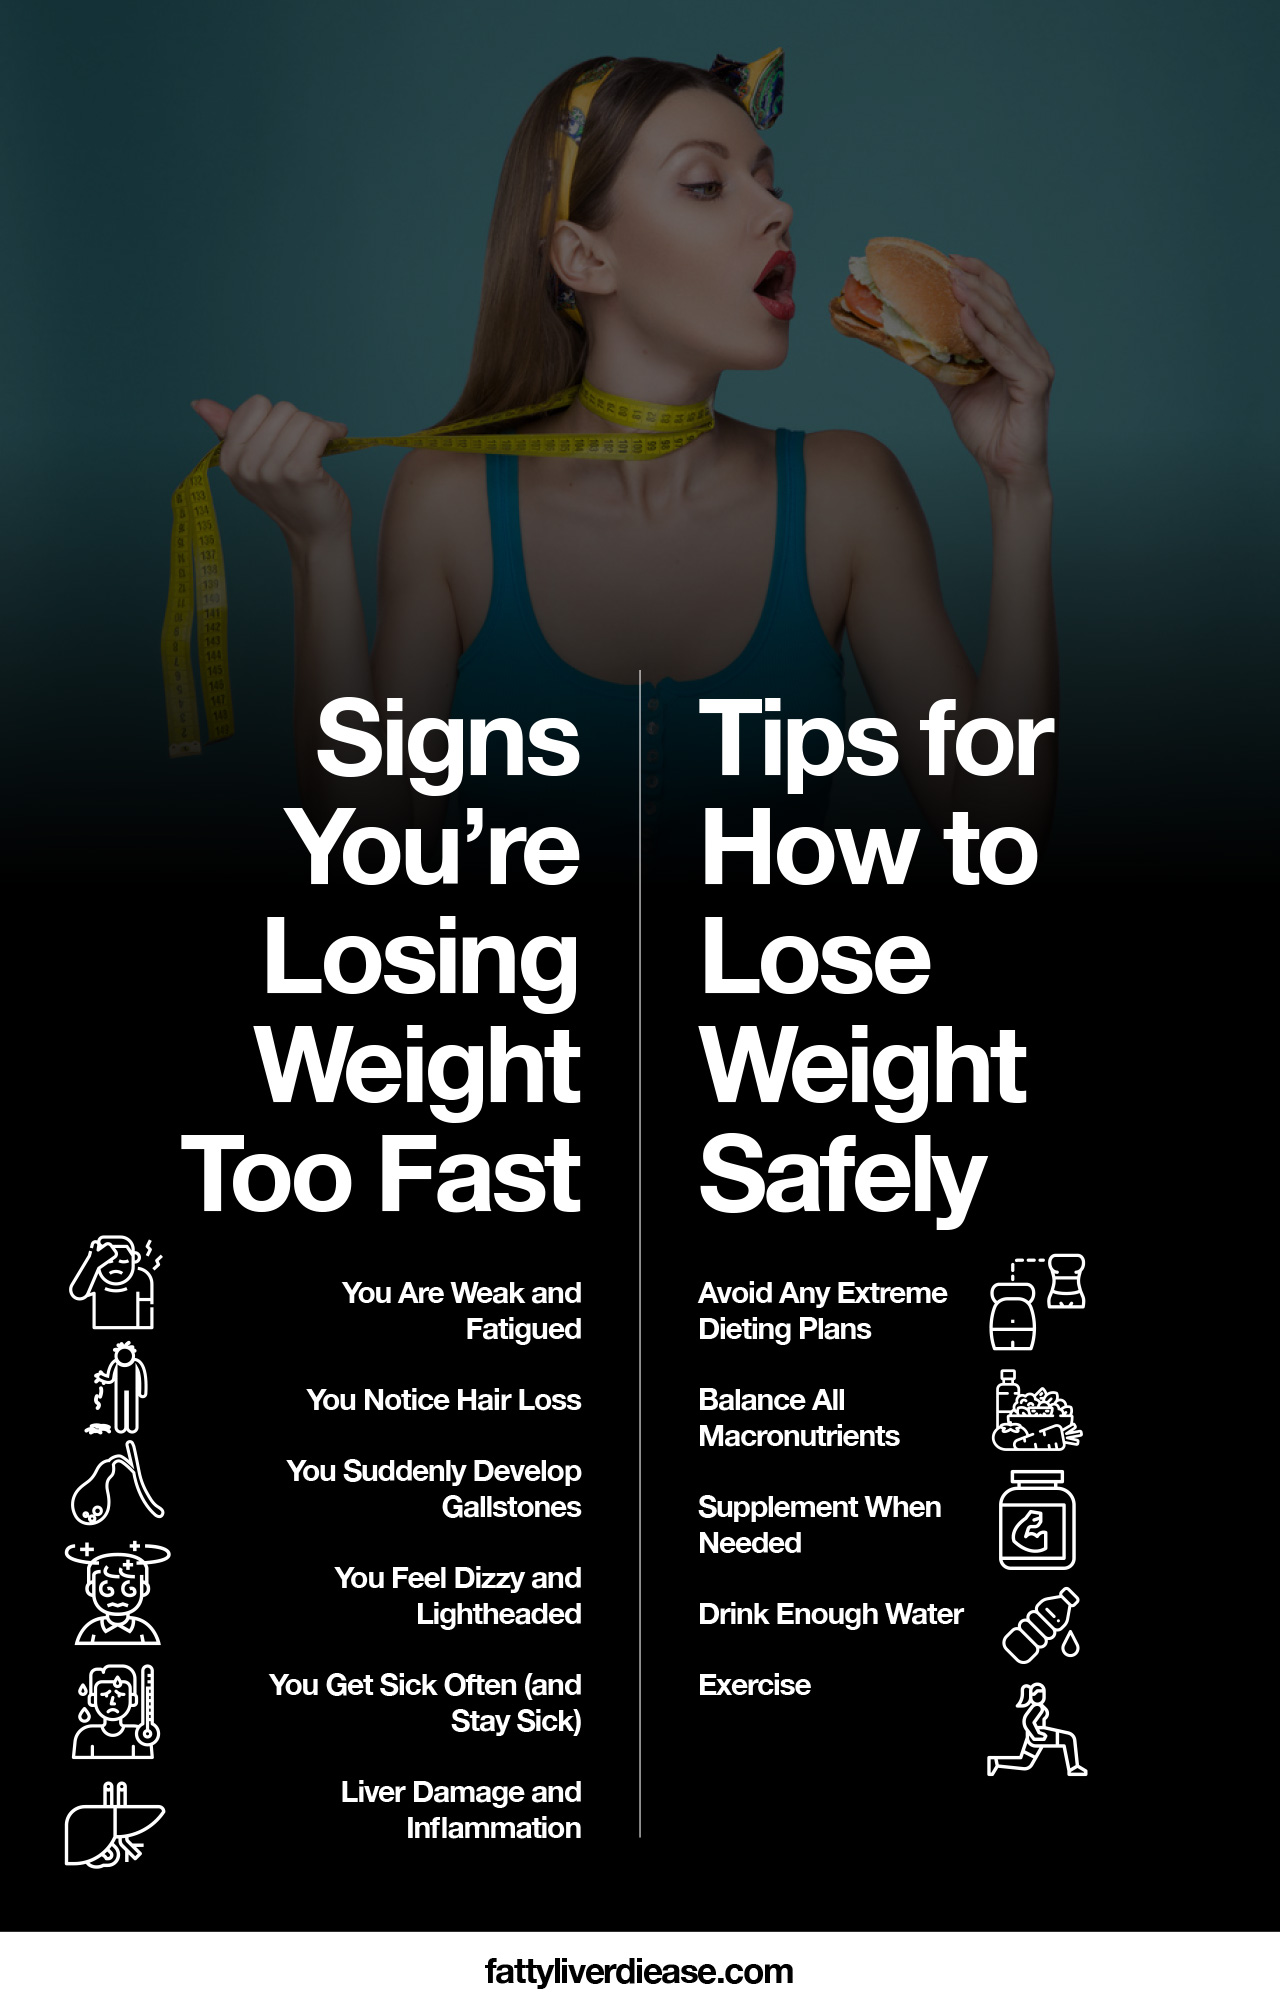 Signs You’re Losing Weight Too Fast